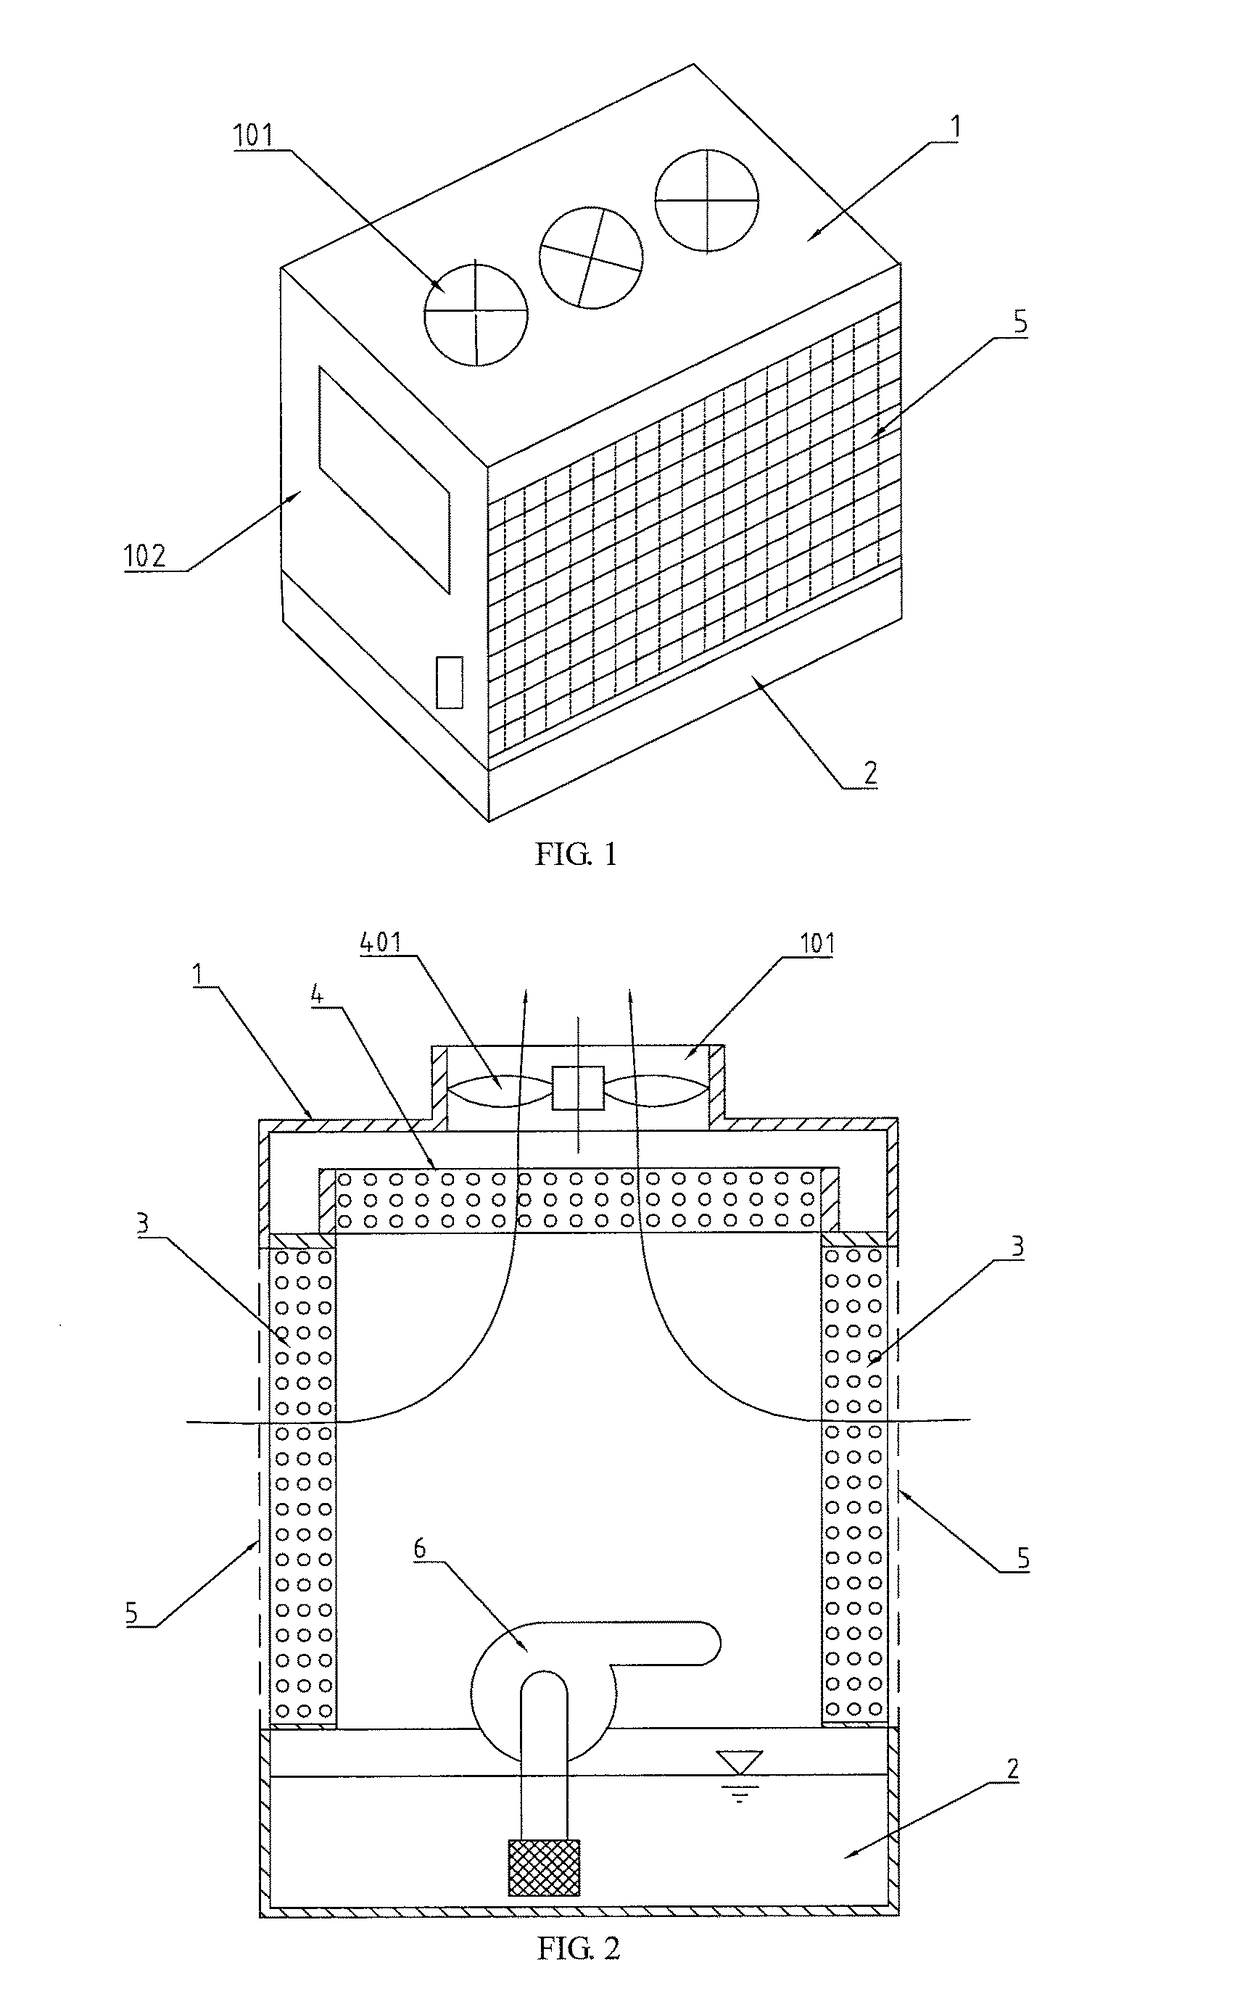 Air purification and condensation water-production system